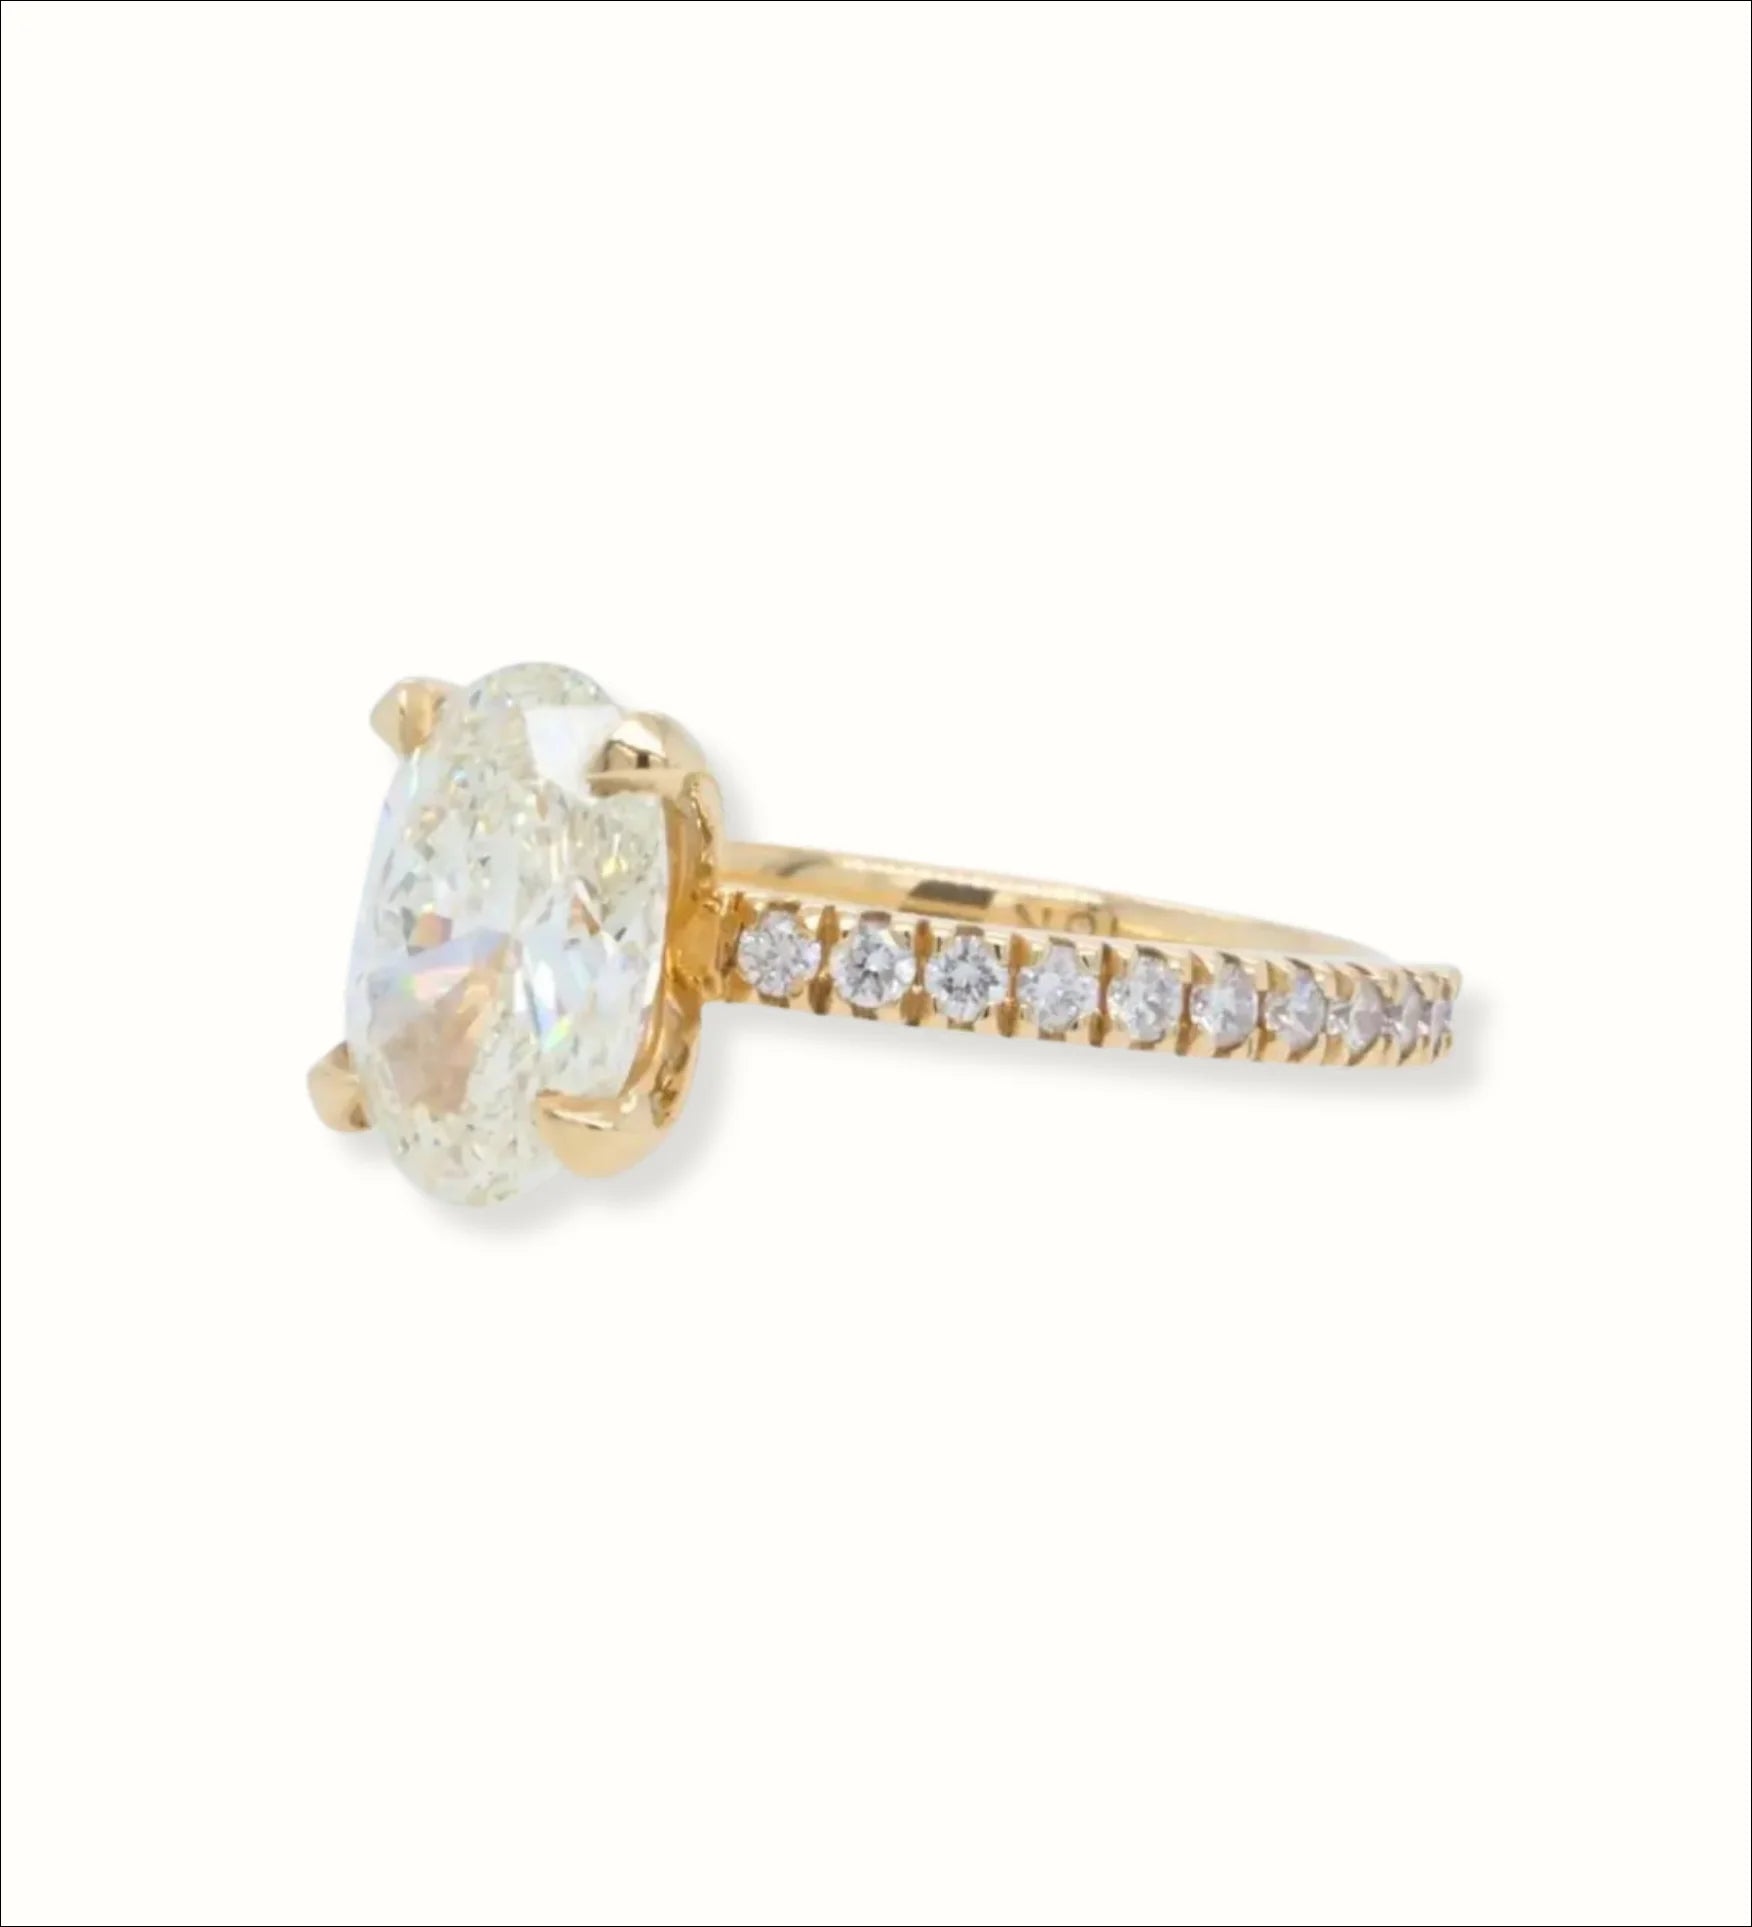 The Crown Jewel: 18k Gold with 1.6ct Oval Diamond | Home